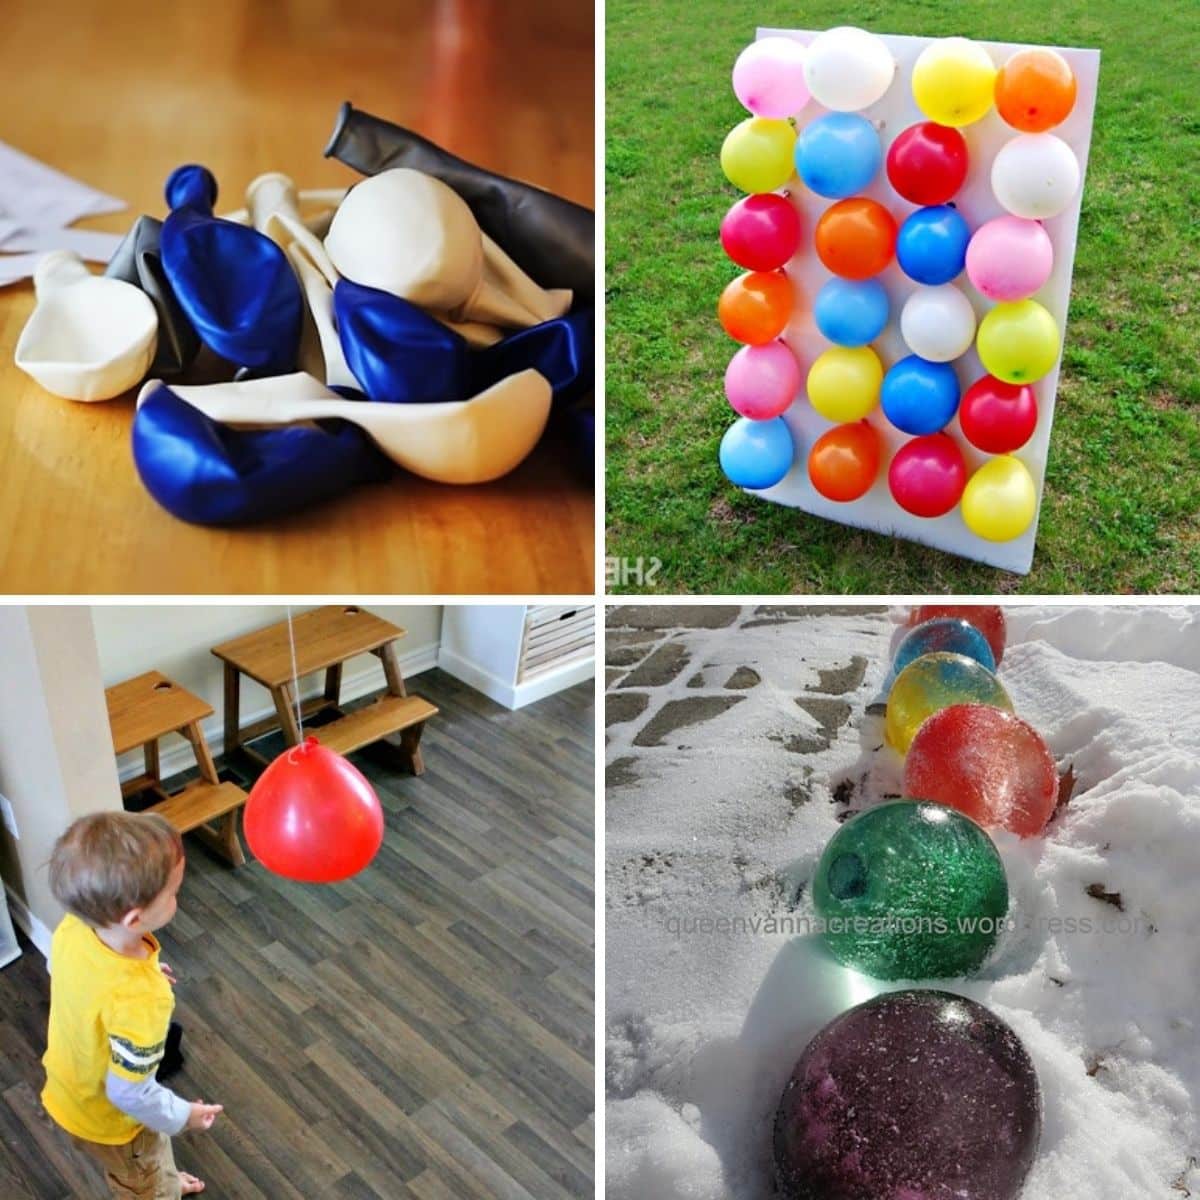 4 images of fun balloon games for kids.